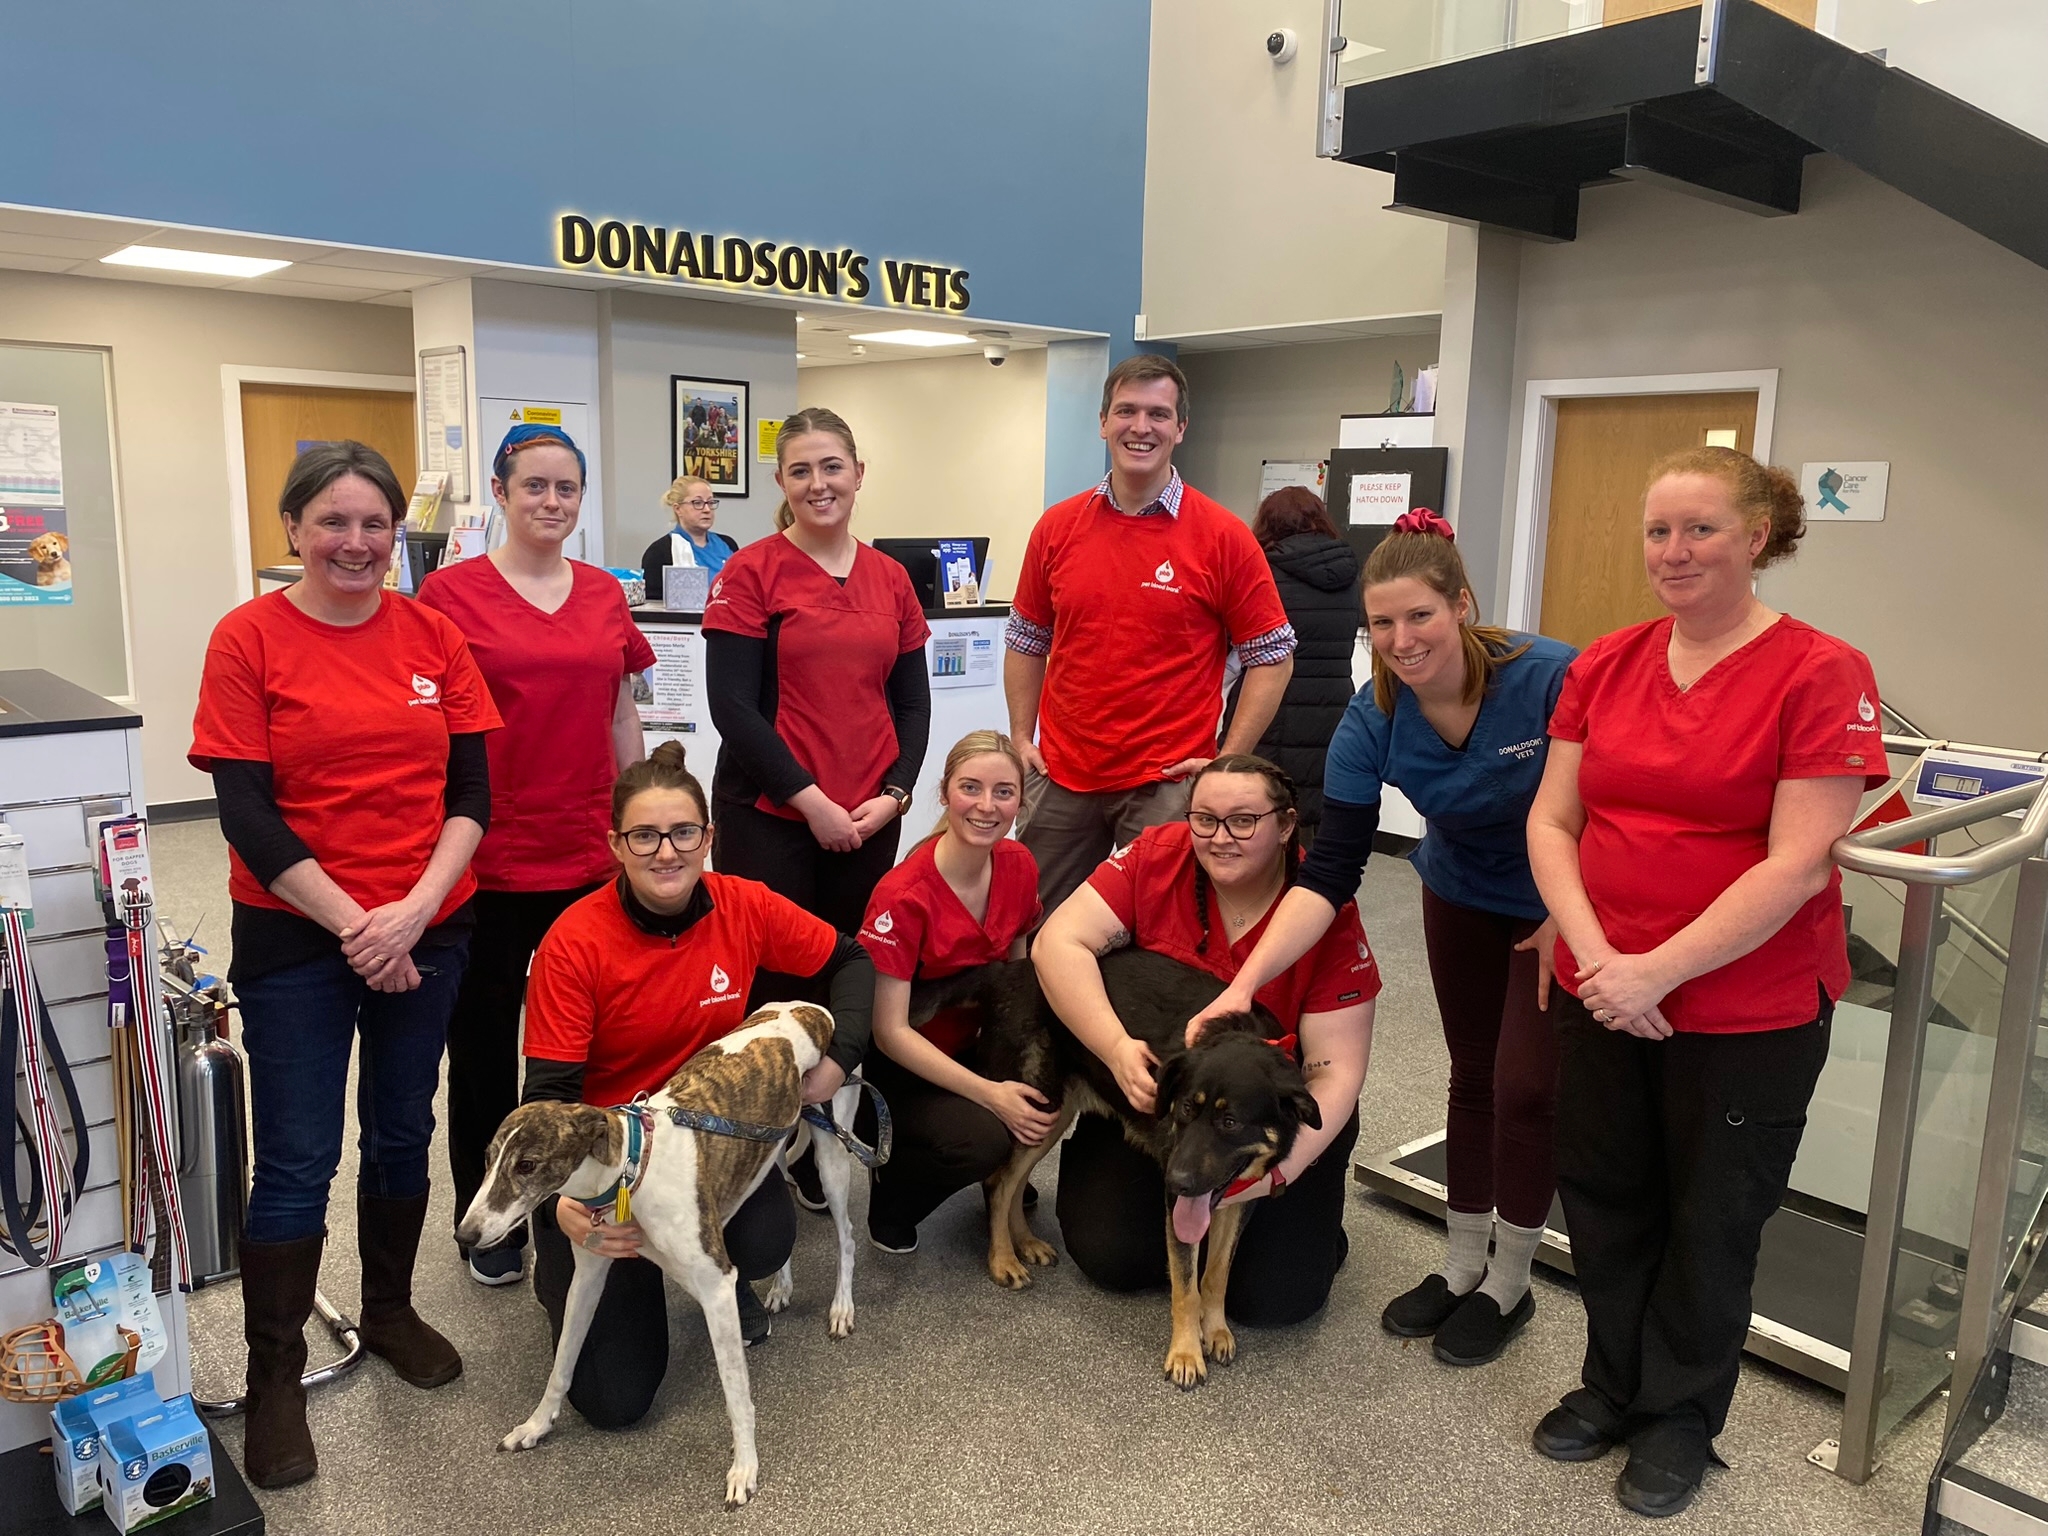 Donaldson's vets team with two dogs.